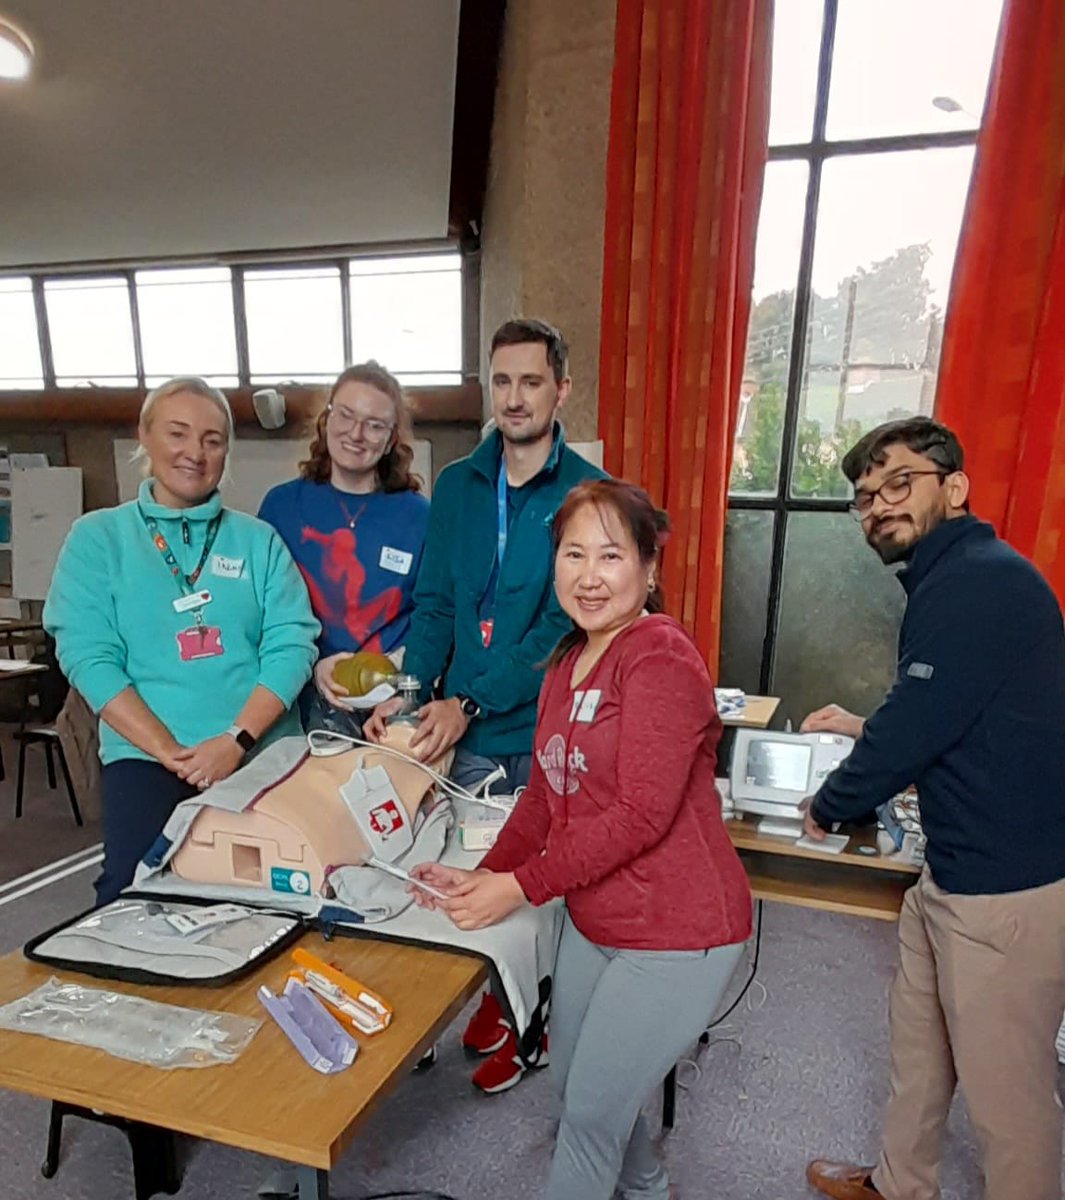 Another Heartcode ACLS this week on Wed 18th Oct. Well done to all 15 staff members. Excellent participation and feedback. Thanks to Dr. Jubil and all our fantastic Instructors.#earlyrecognitionsaveslives #INEWS #chainofsurvival #BLS #ACLS